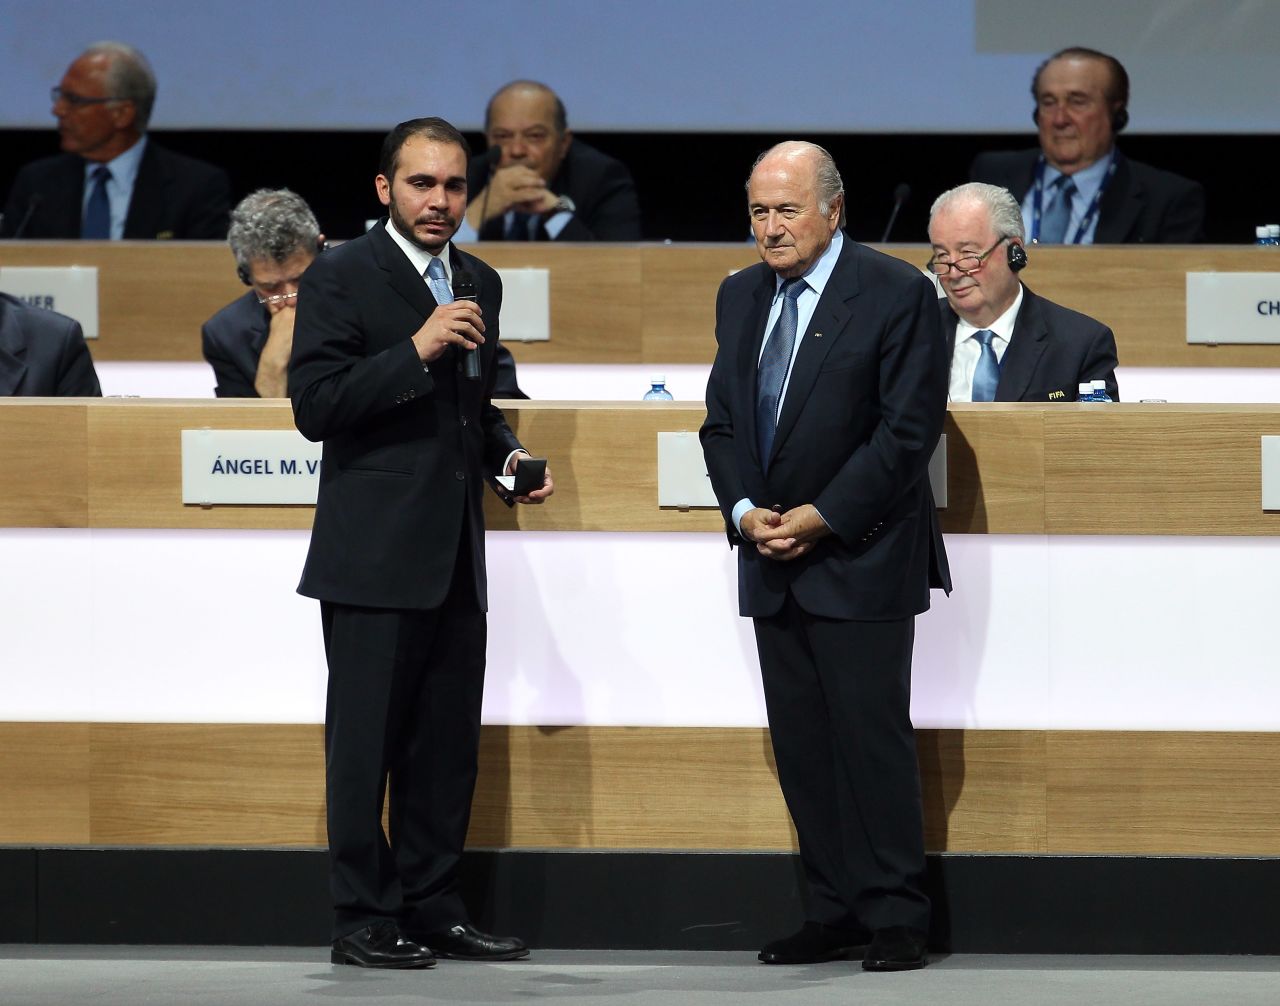 Blatter, who was elected unopposed in 2011, also faces competition from Prince Ali of Jordan and independent candidate Jerome Champagne though he enjoys huge popularity among the majority of FIFA's 209 members. UEFA president Michel Platini has called on Blatter to stand down but the president maintains his "mission is not finished."